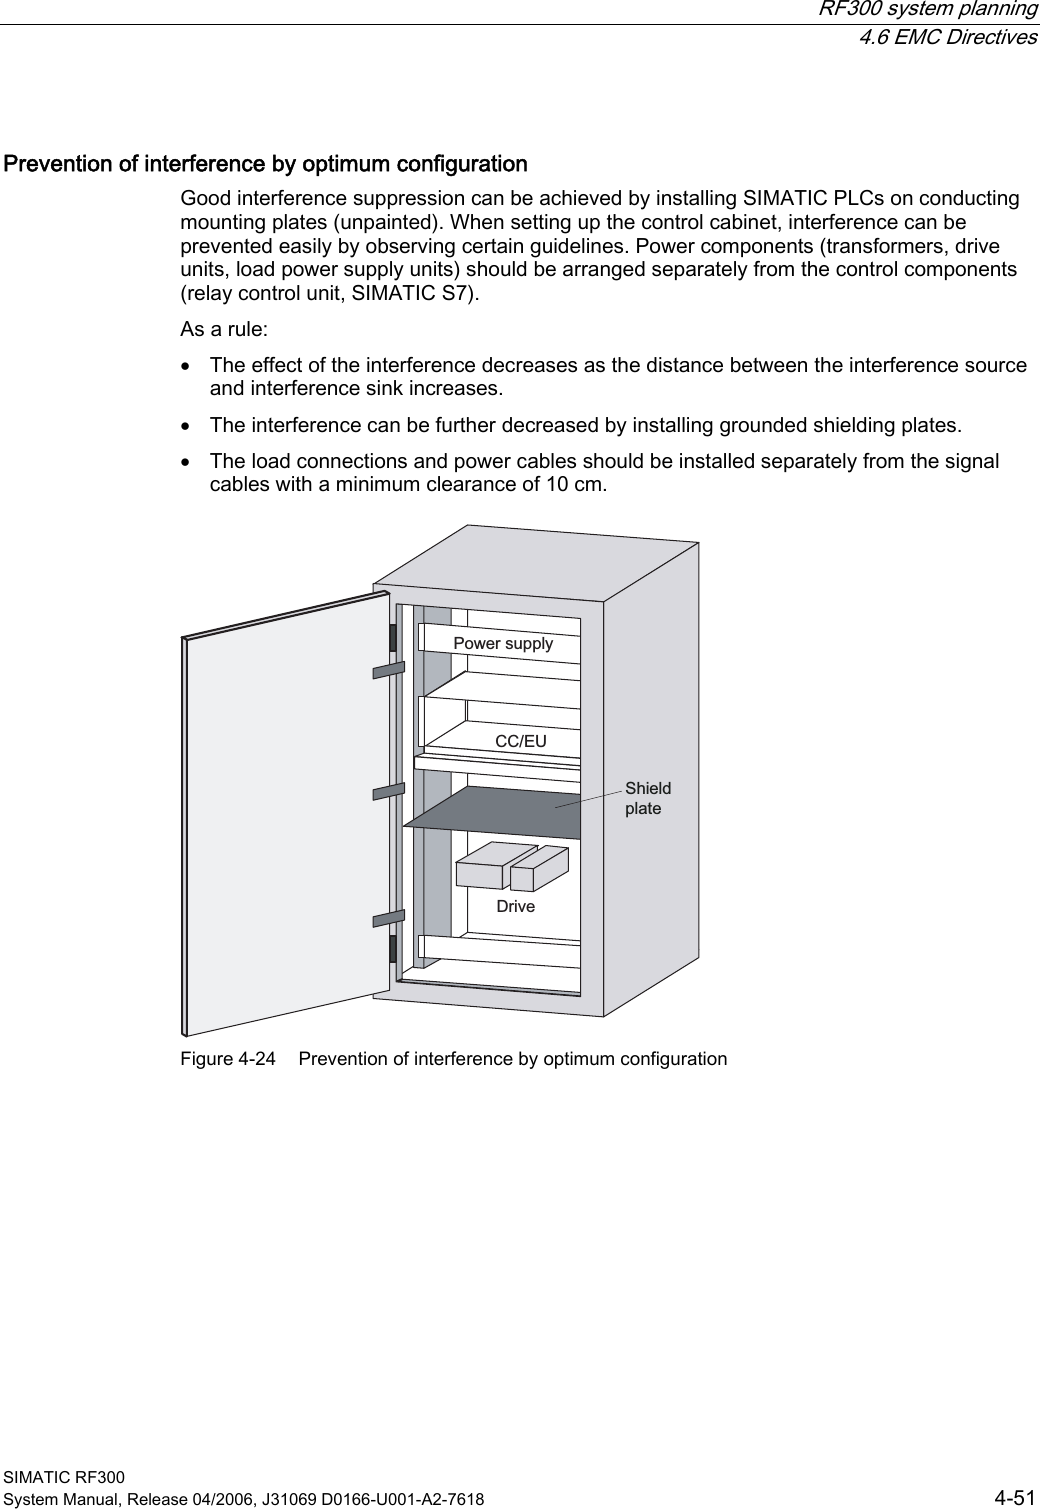  RF300 system planning  4.6 EMC Directives SIMATIC RF300 System Manual, Release 04/2006, J31069 D0166-U001-A2-7618  4-51 Prevention of interference by optimum configuration Good interference suppression can be achieved by installing SIMATIC PLCs on conducting mounting plates (unpainted). When setting up the control cabinet, interference can be prevented easily by observing certain guidelines. Power components (transformers, drive units, load power supply units) should be arranged separately from the control components (relay control unit, SIMATIC S7). As a rule: • The effect of the interference decreases as the distance between the interference source and interference sink increases. • The interference can be further decreased by installing grounded shielding plates. • The load connections and power cables should be installed separately from the signal cables with a minimum clearance of 10 cm. 3RZHUVXSSO\&amp;&amp;(8&apos;ULYH6KLHOGSODWH Figure 4-24  Prevention of interference by optimum configuration 